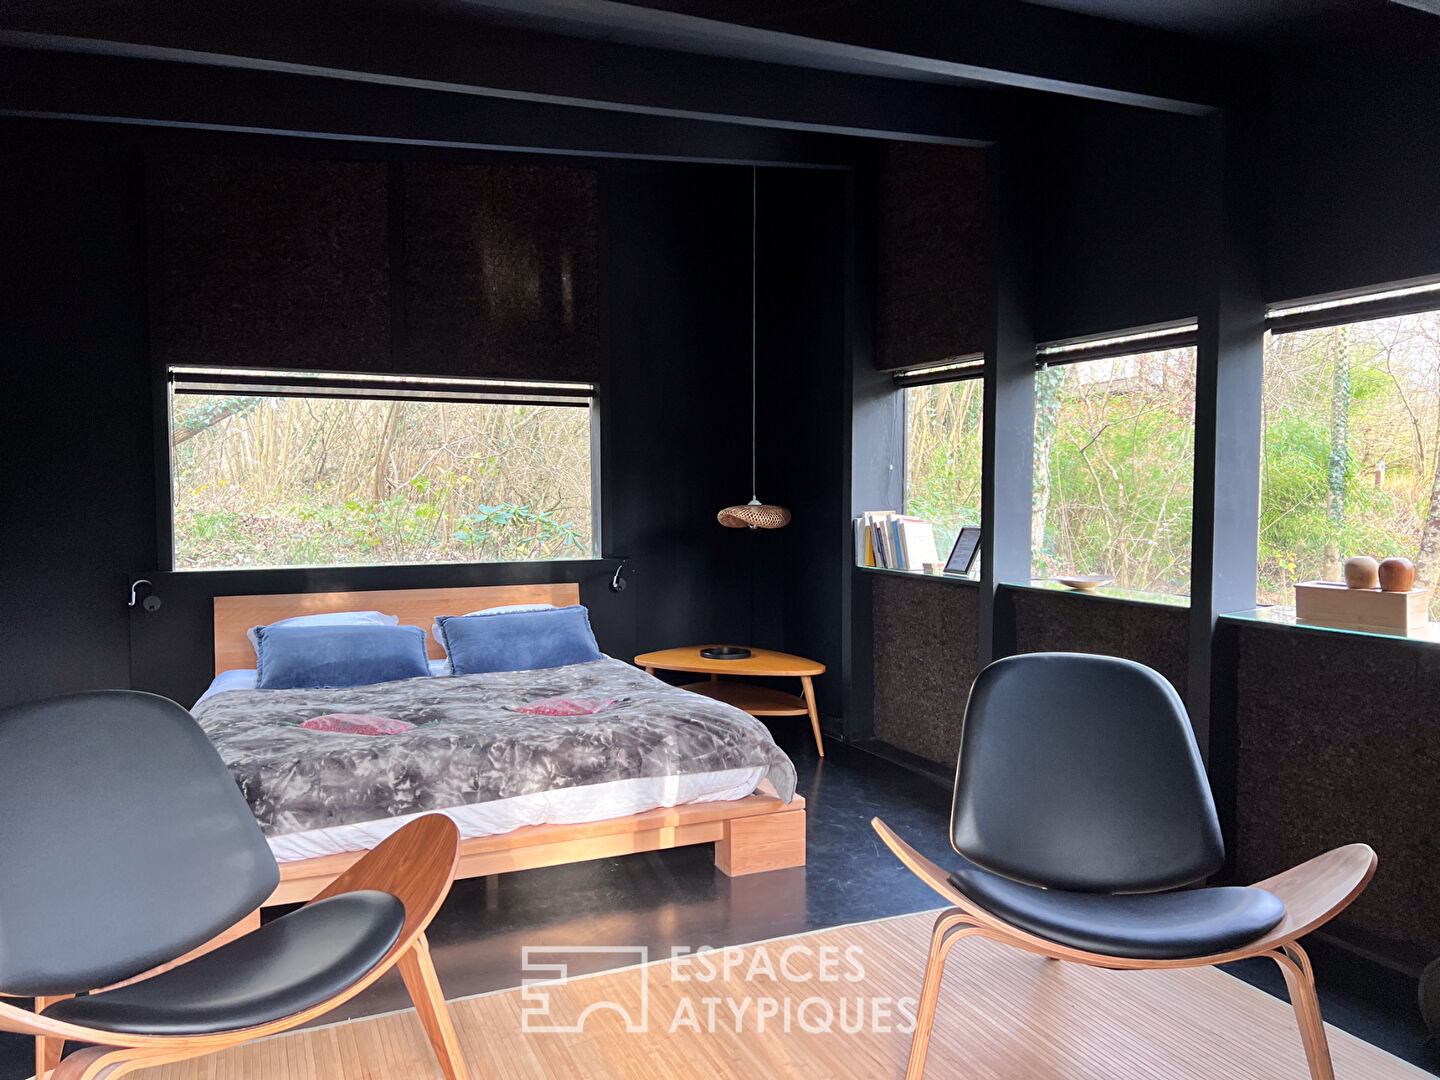 On the edge of the Baie de Somme nature reserve, property and ecolodges